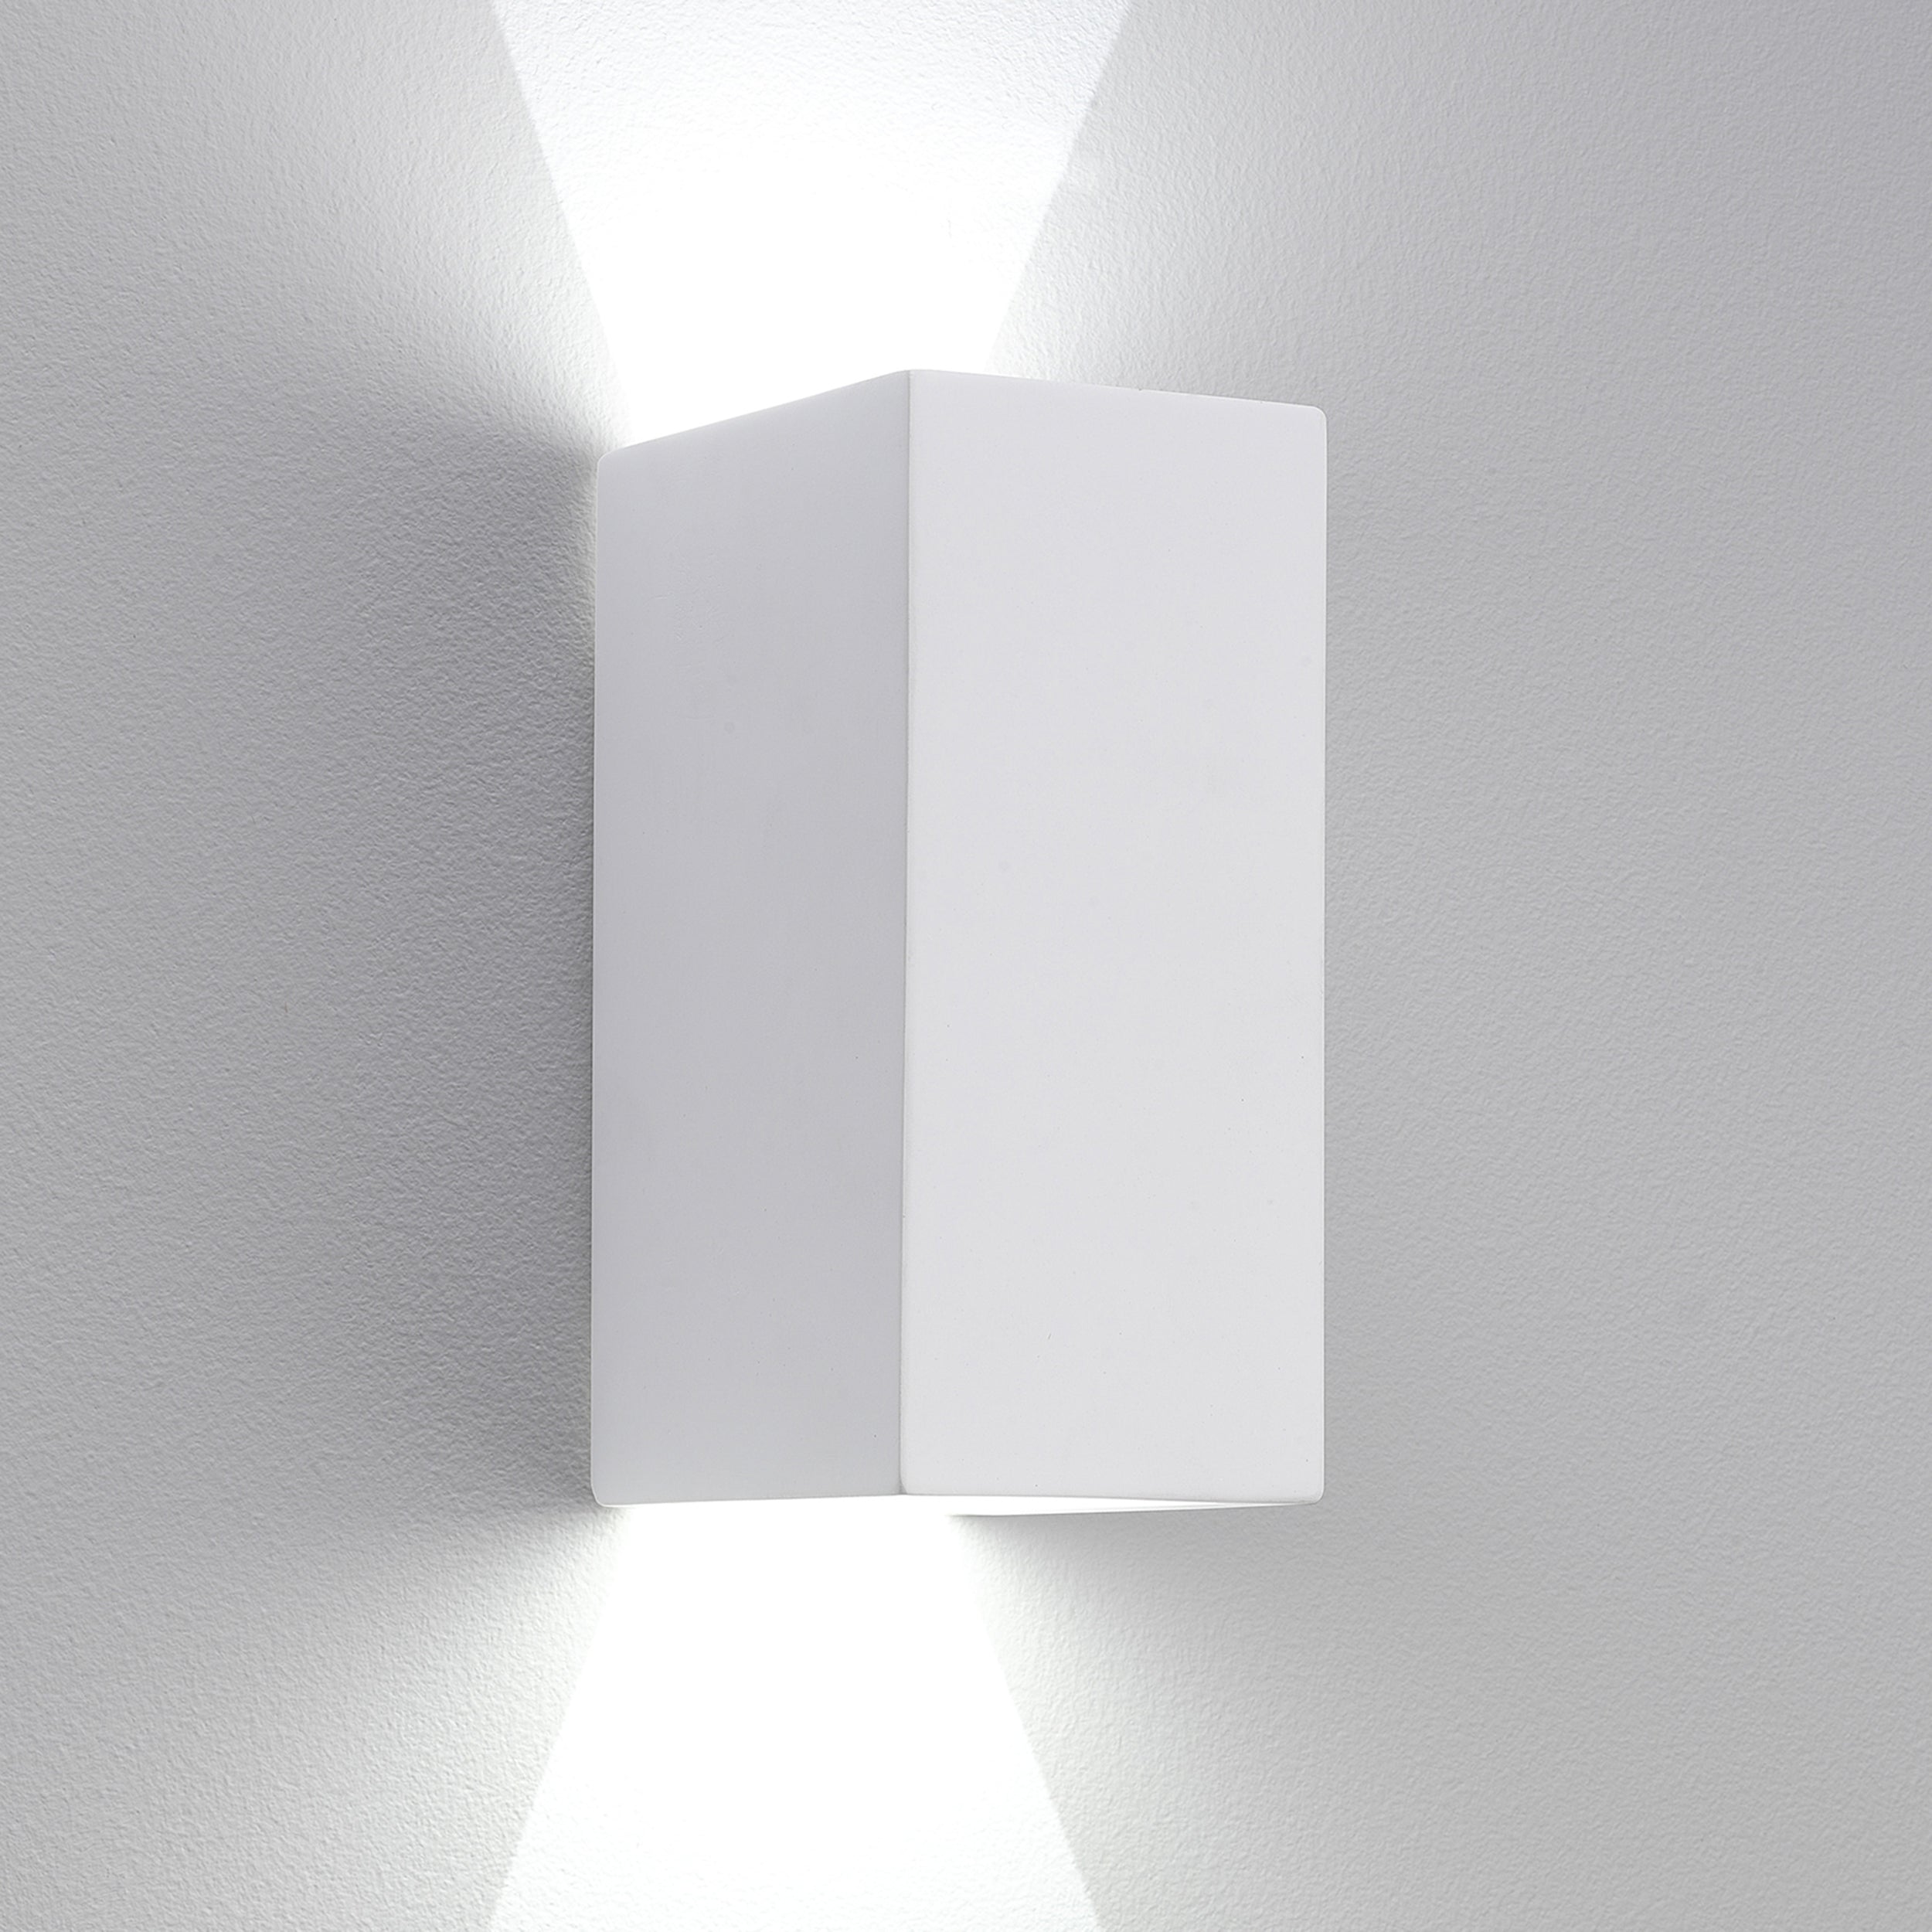 Astro Lighting Parma Wall Light Fixtures Astro Lighting 3.94x2.76x6.3 Plaster Yes (Integral), High Power LED